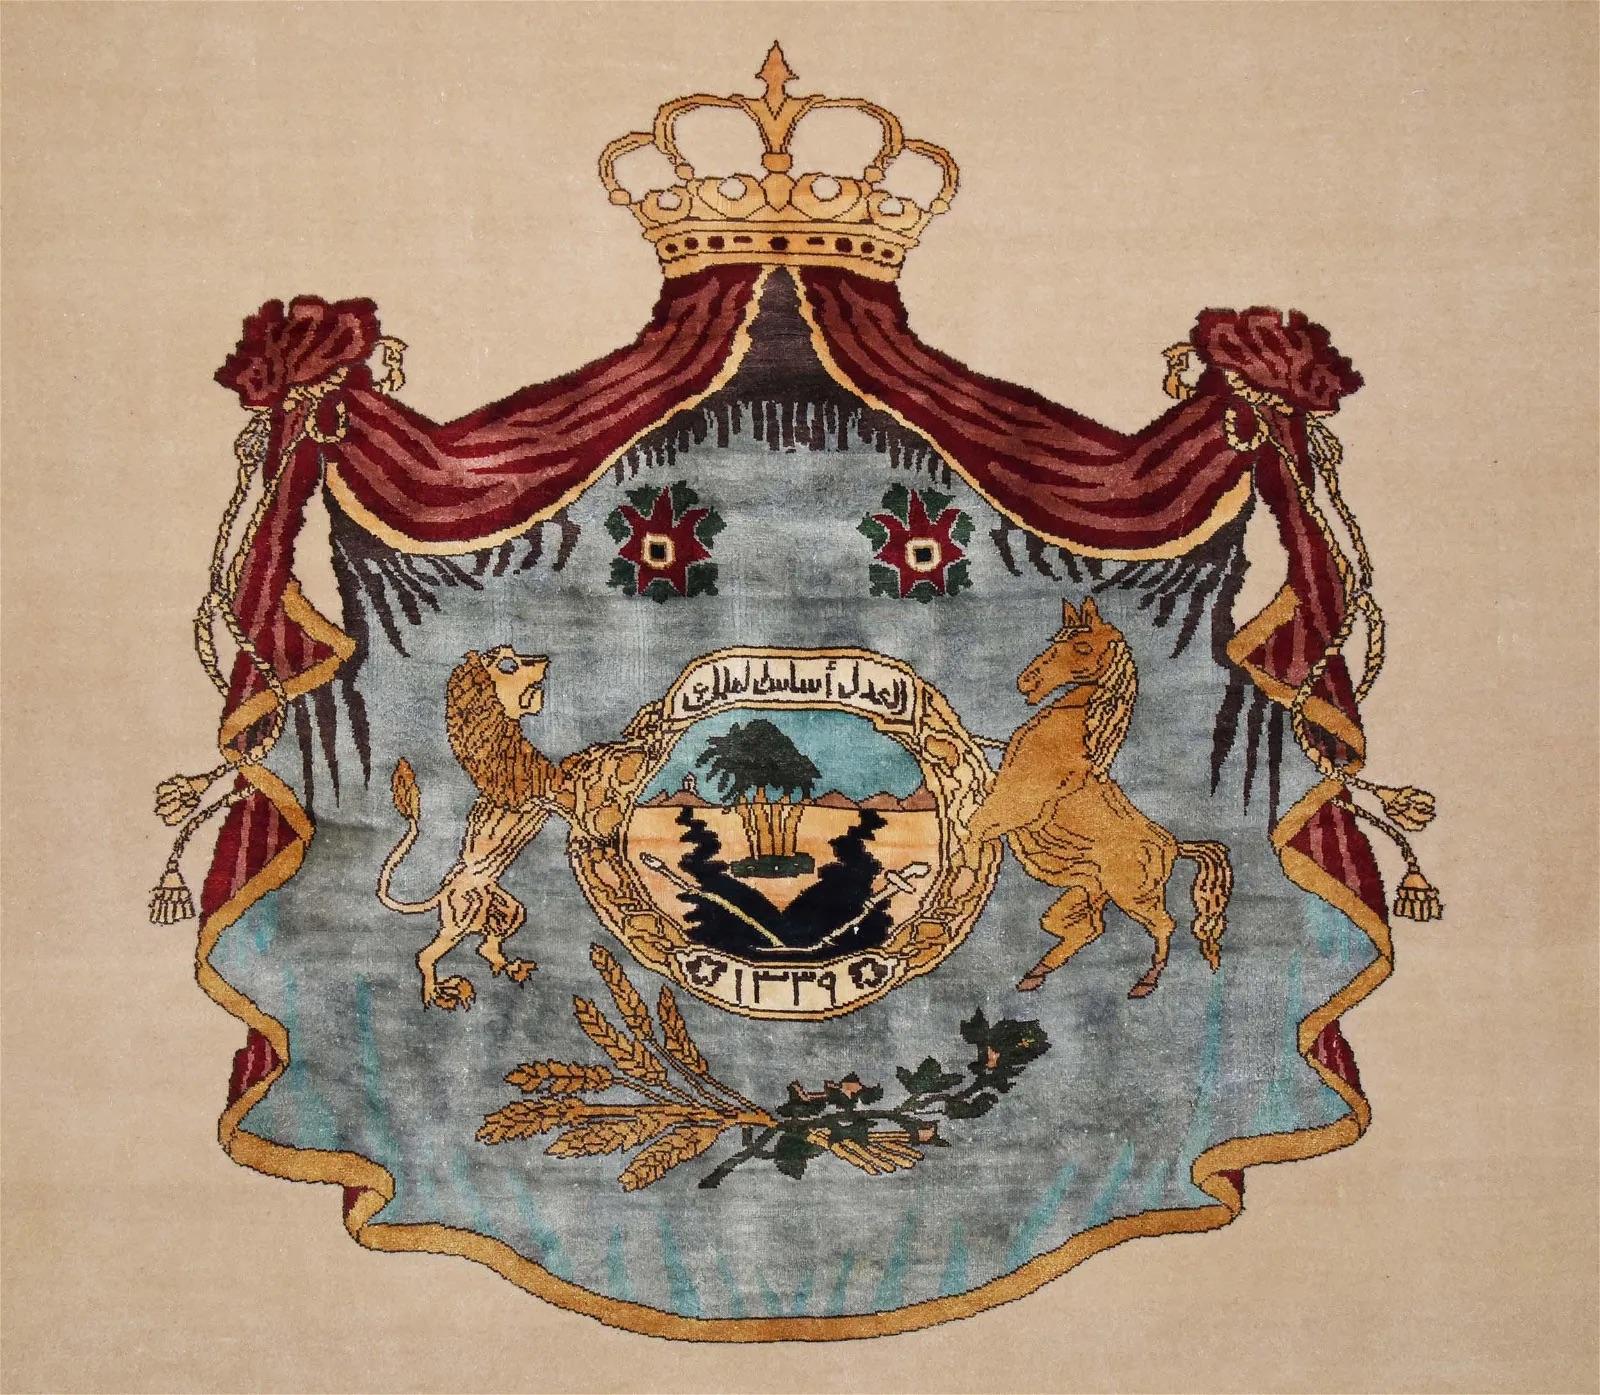 Rare Royal Iraqi silk and wool coat of arms rug Dated 1339 Six;k and Wool On Silk Foundation.
The arabic inscription at the bottom tells it like it is: The Emblem of the Iraqi State.
Basically we see the royal coat of arms of the Hashemite Kings